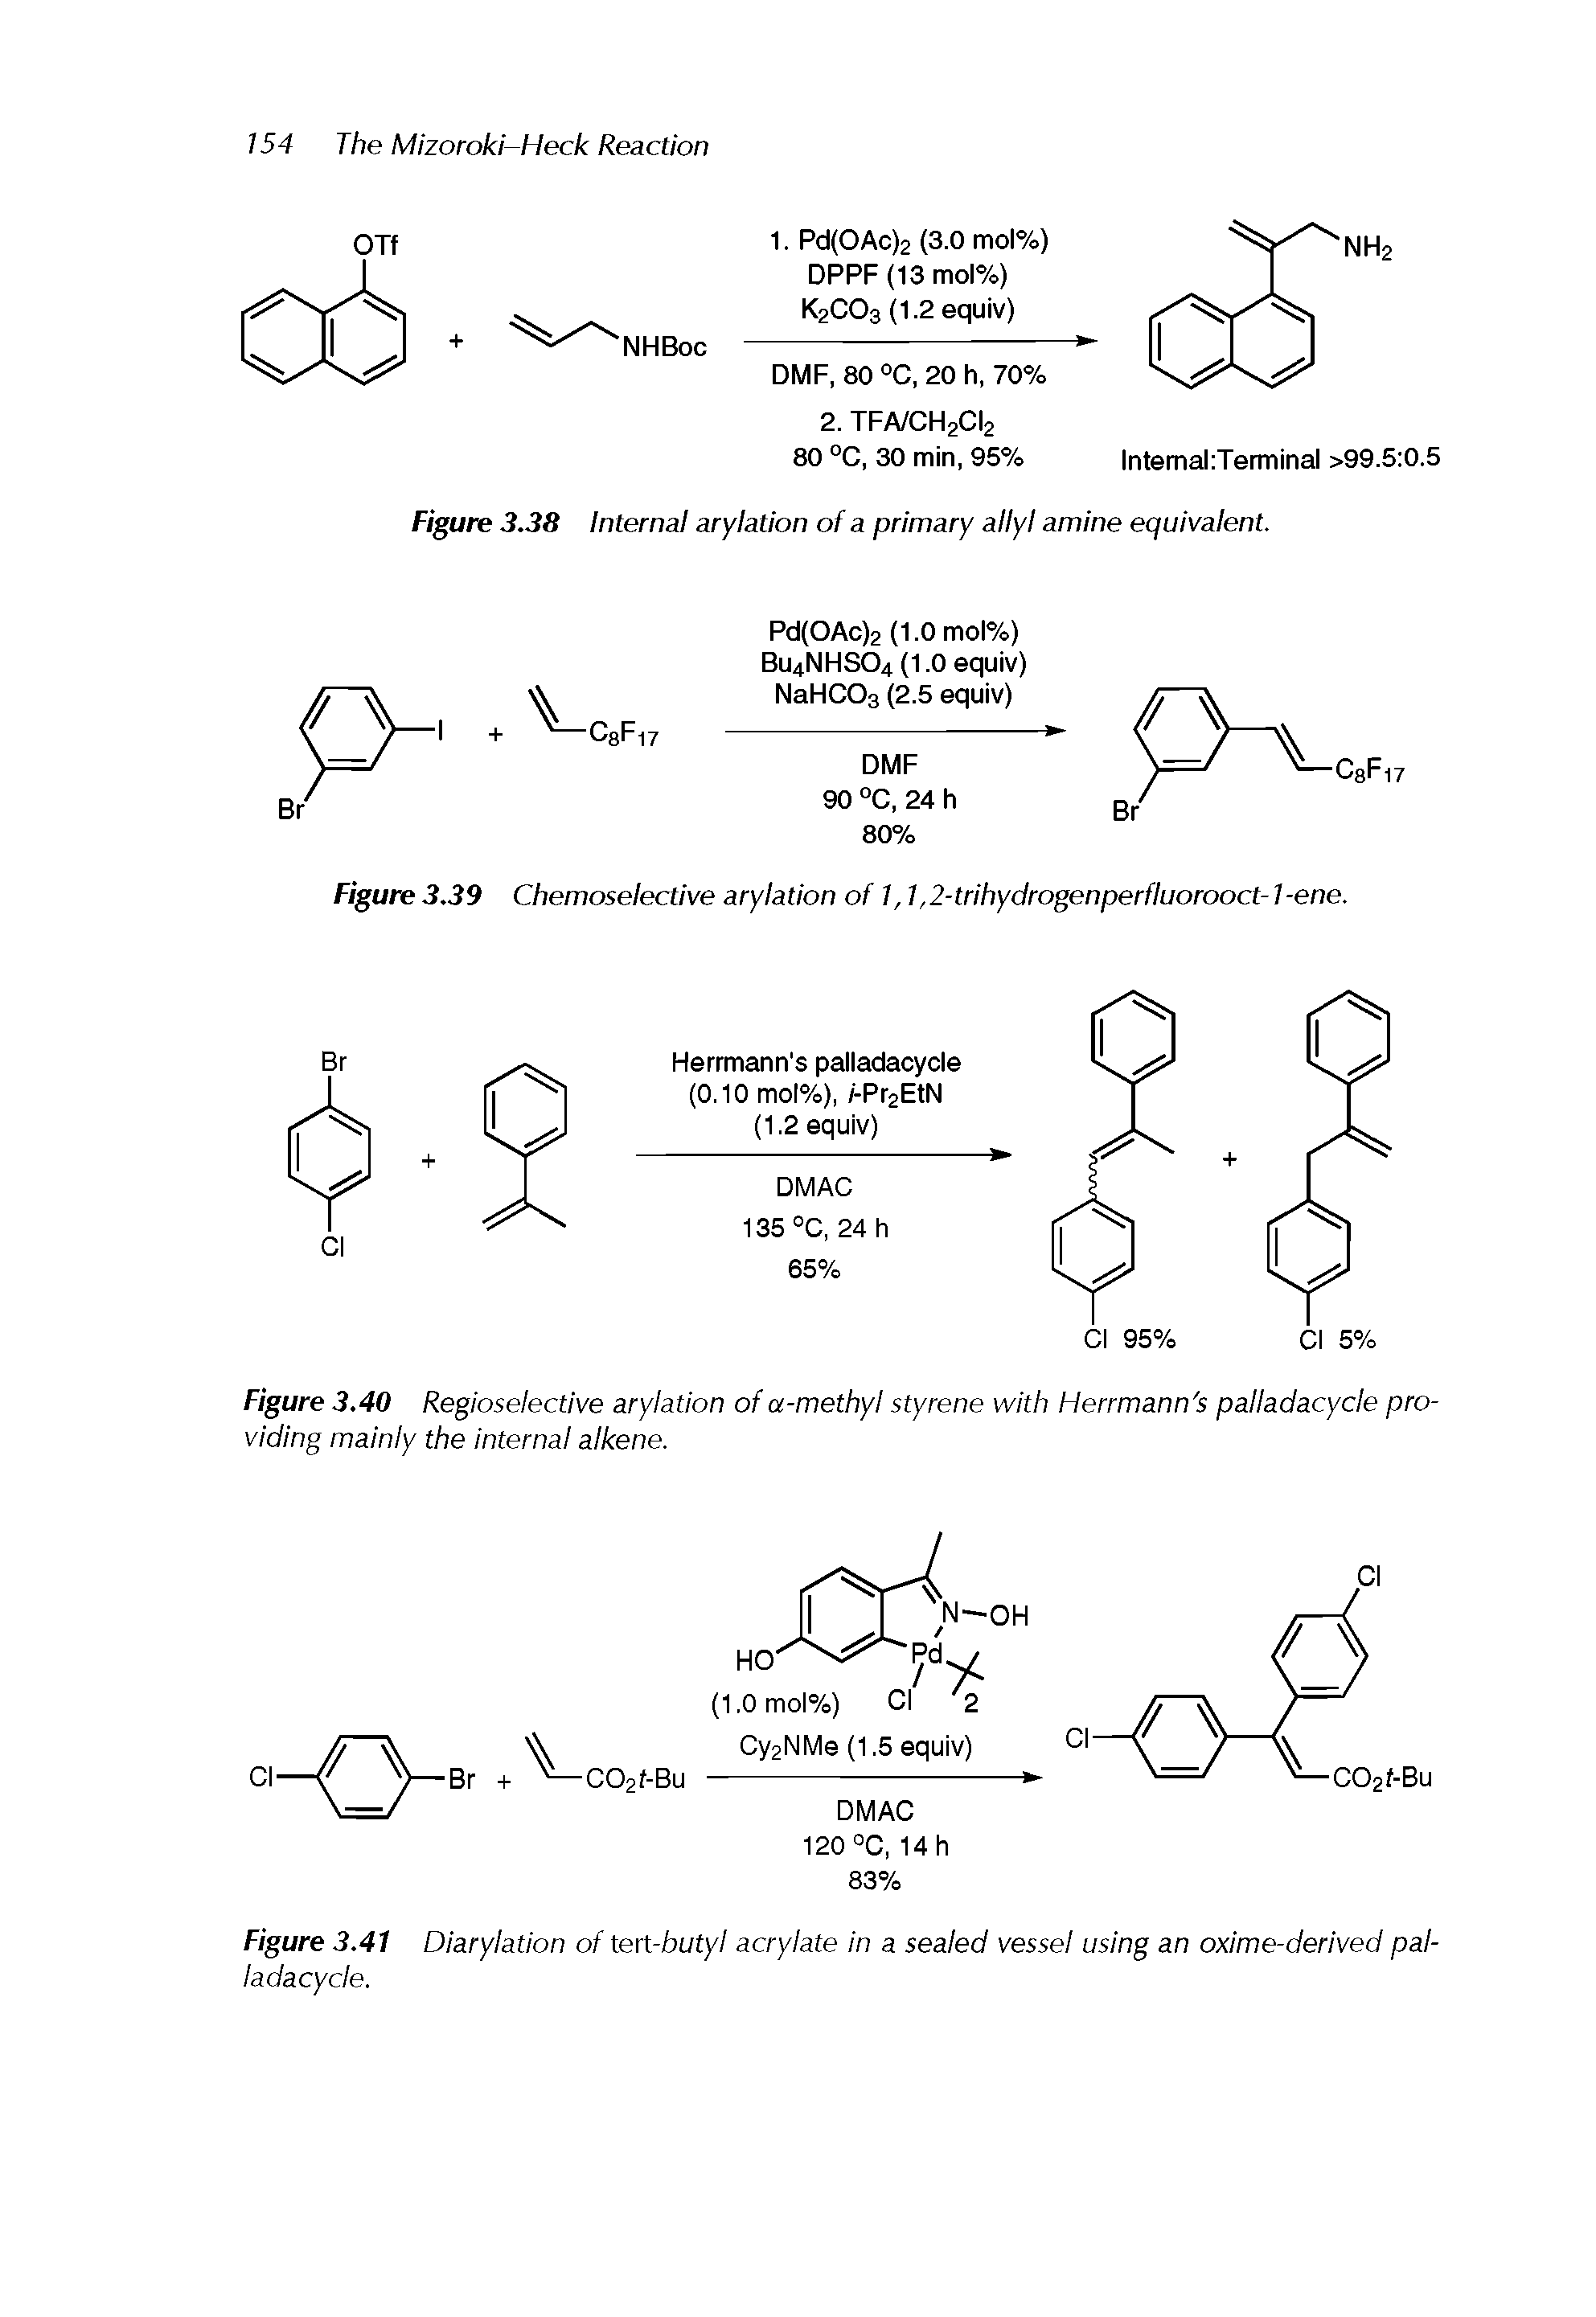 Figure 3.41 Diarylation of ten-butyl acrylate in a sealed vessel using an oxIme-derIved palladacycle.